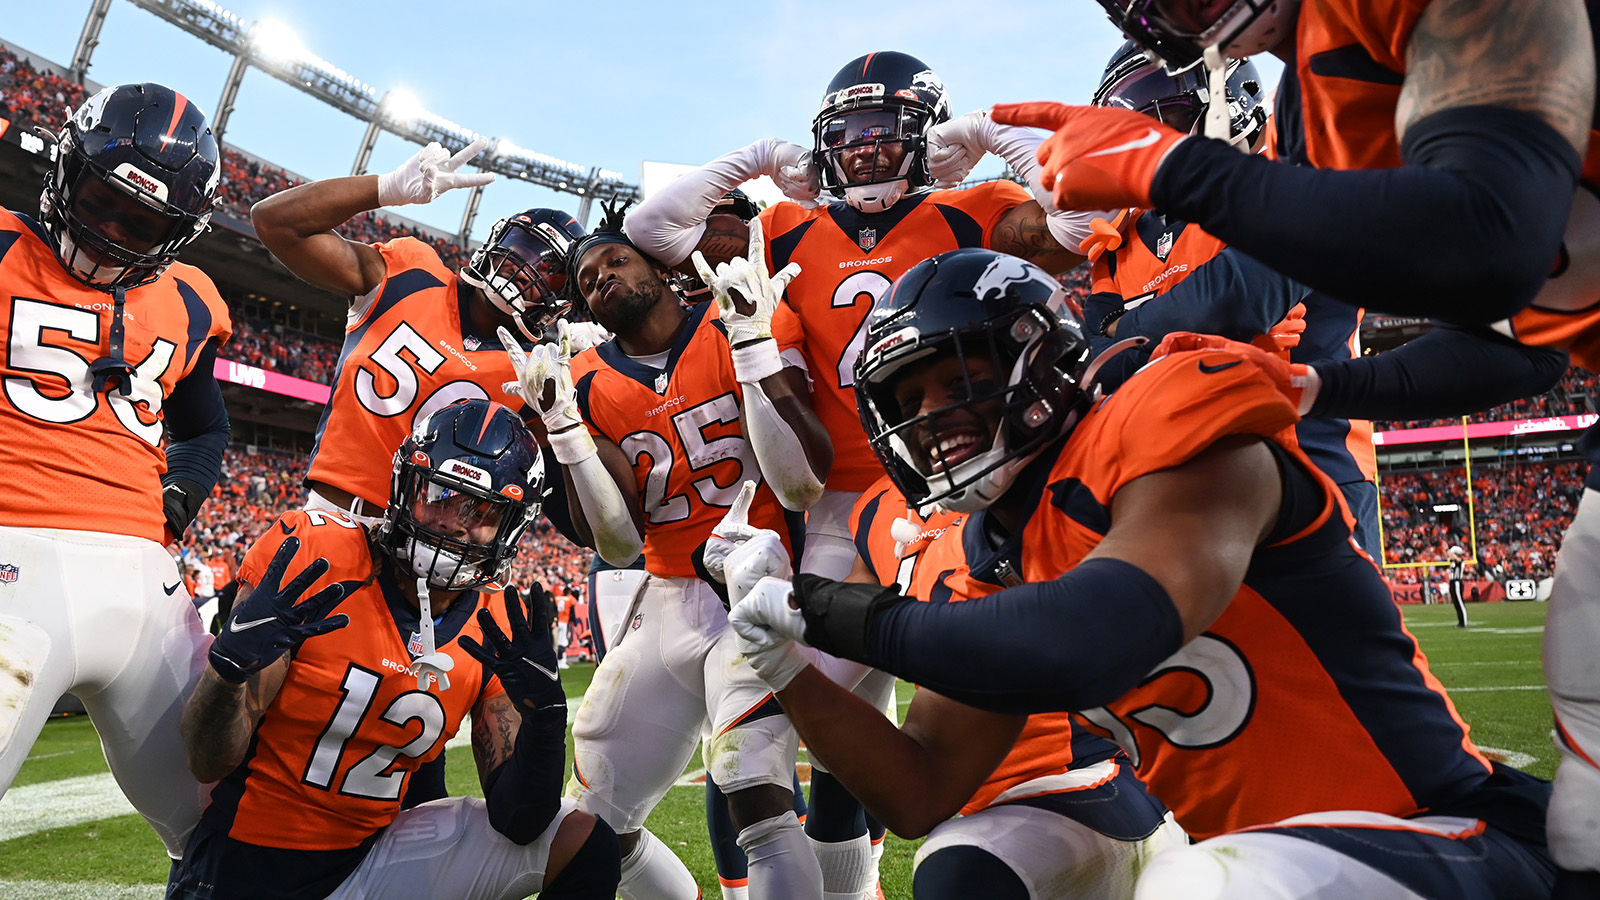 Players celebrate an interception by Denver Broncos cornerback Pat Surtain II, fifth from left, at Empower Field at Mile High on November 28, 2021.